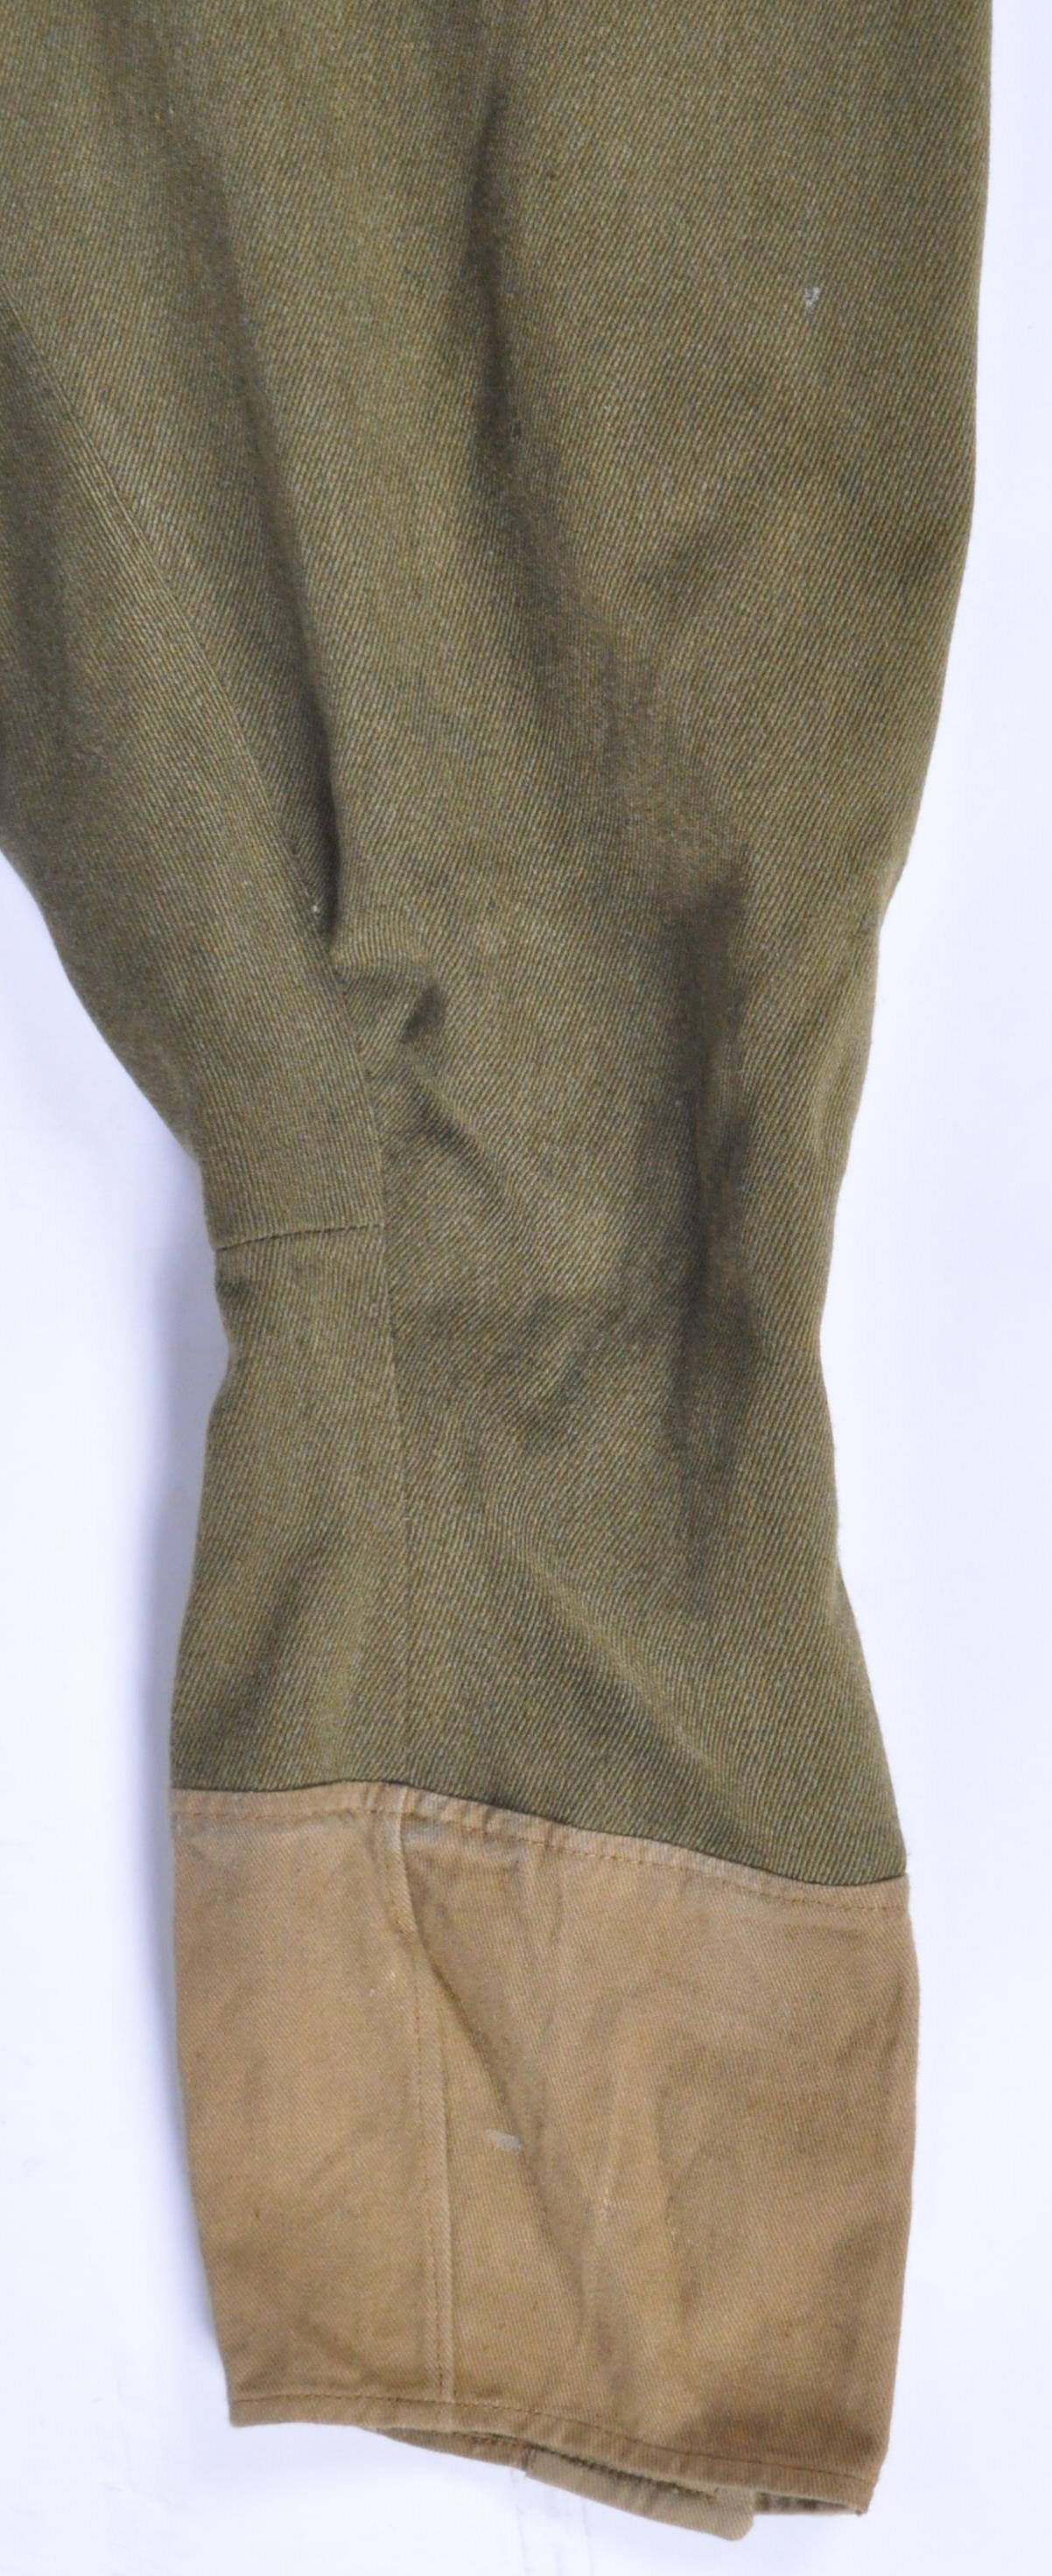 WWII SECOND WORLD WAR BRITISH ARMY UNIFORM BREECHES / TROUSERS - Image 2 of 6